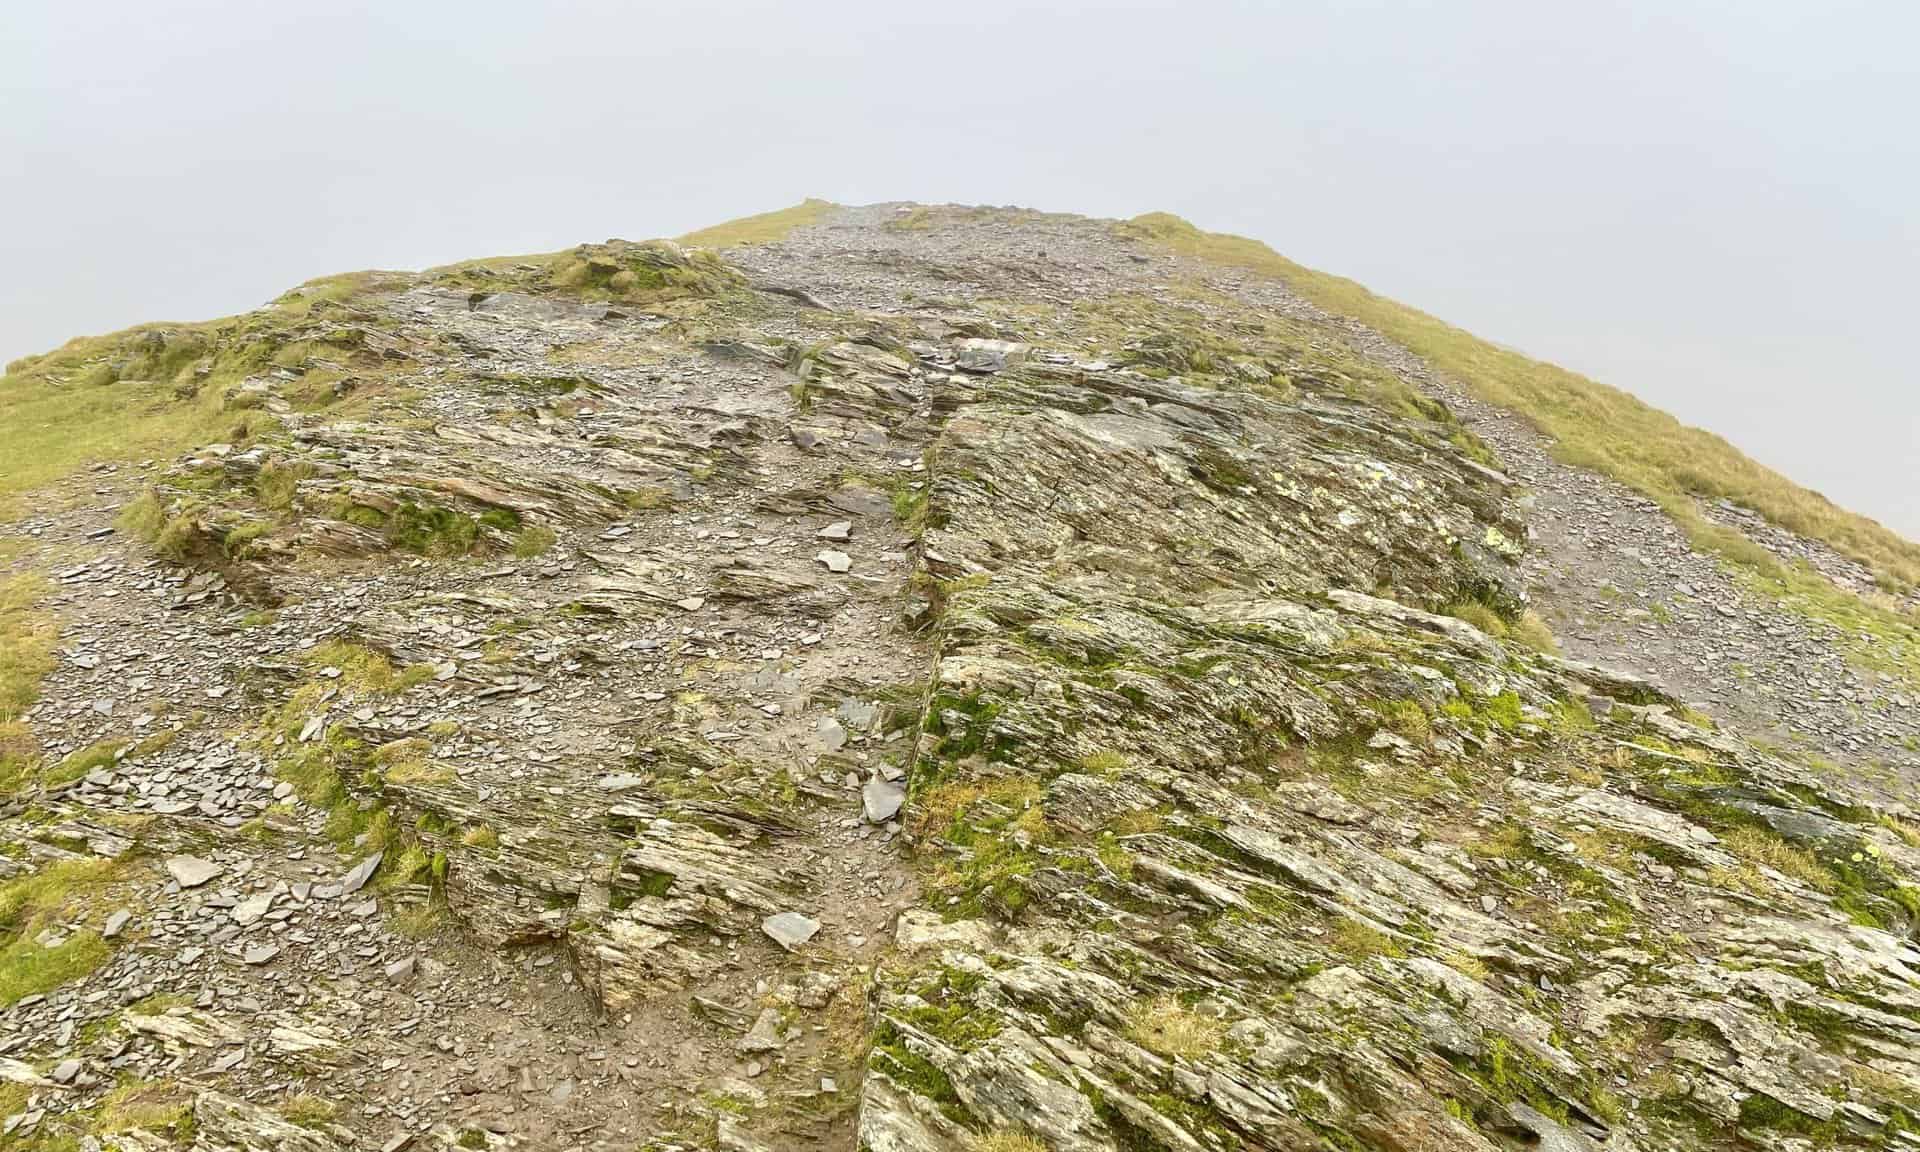 The summit of Grisedale Pike, height 791 metres (2595 feet).